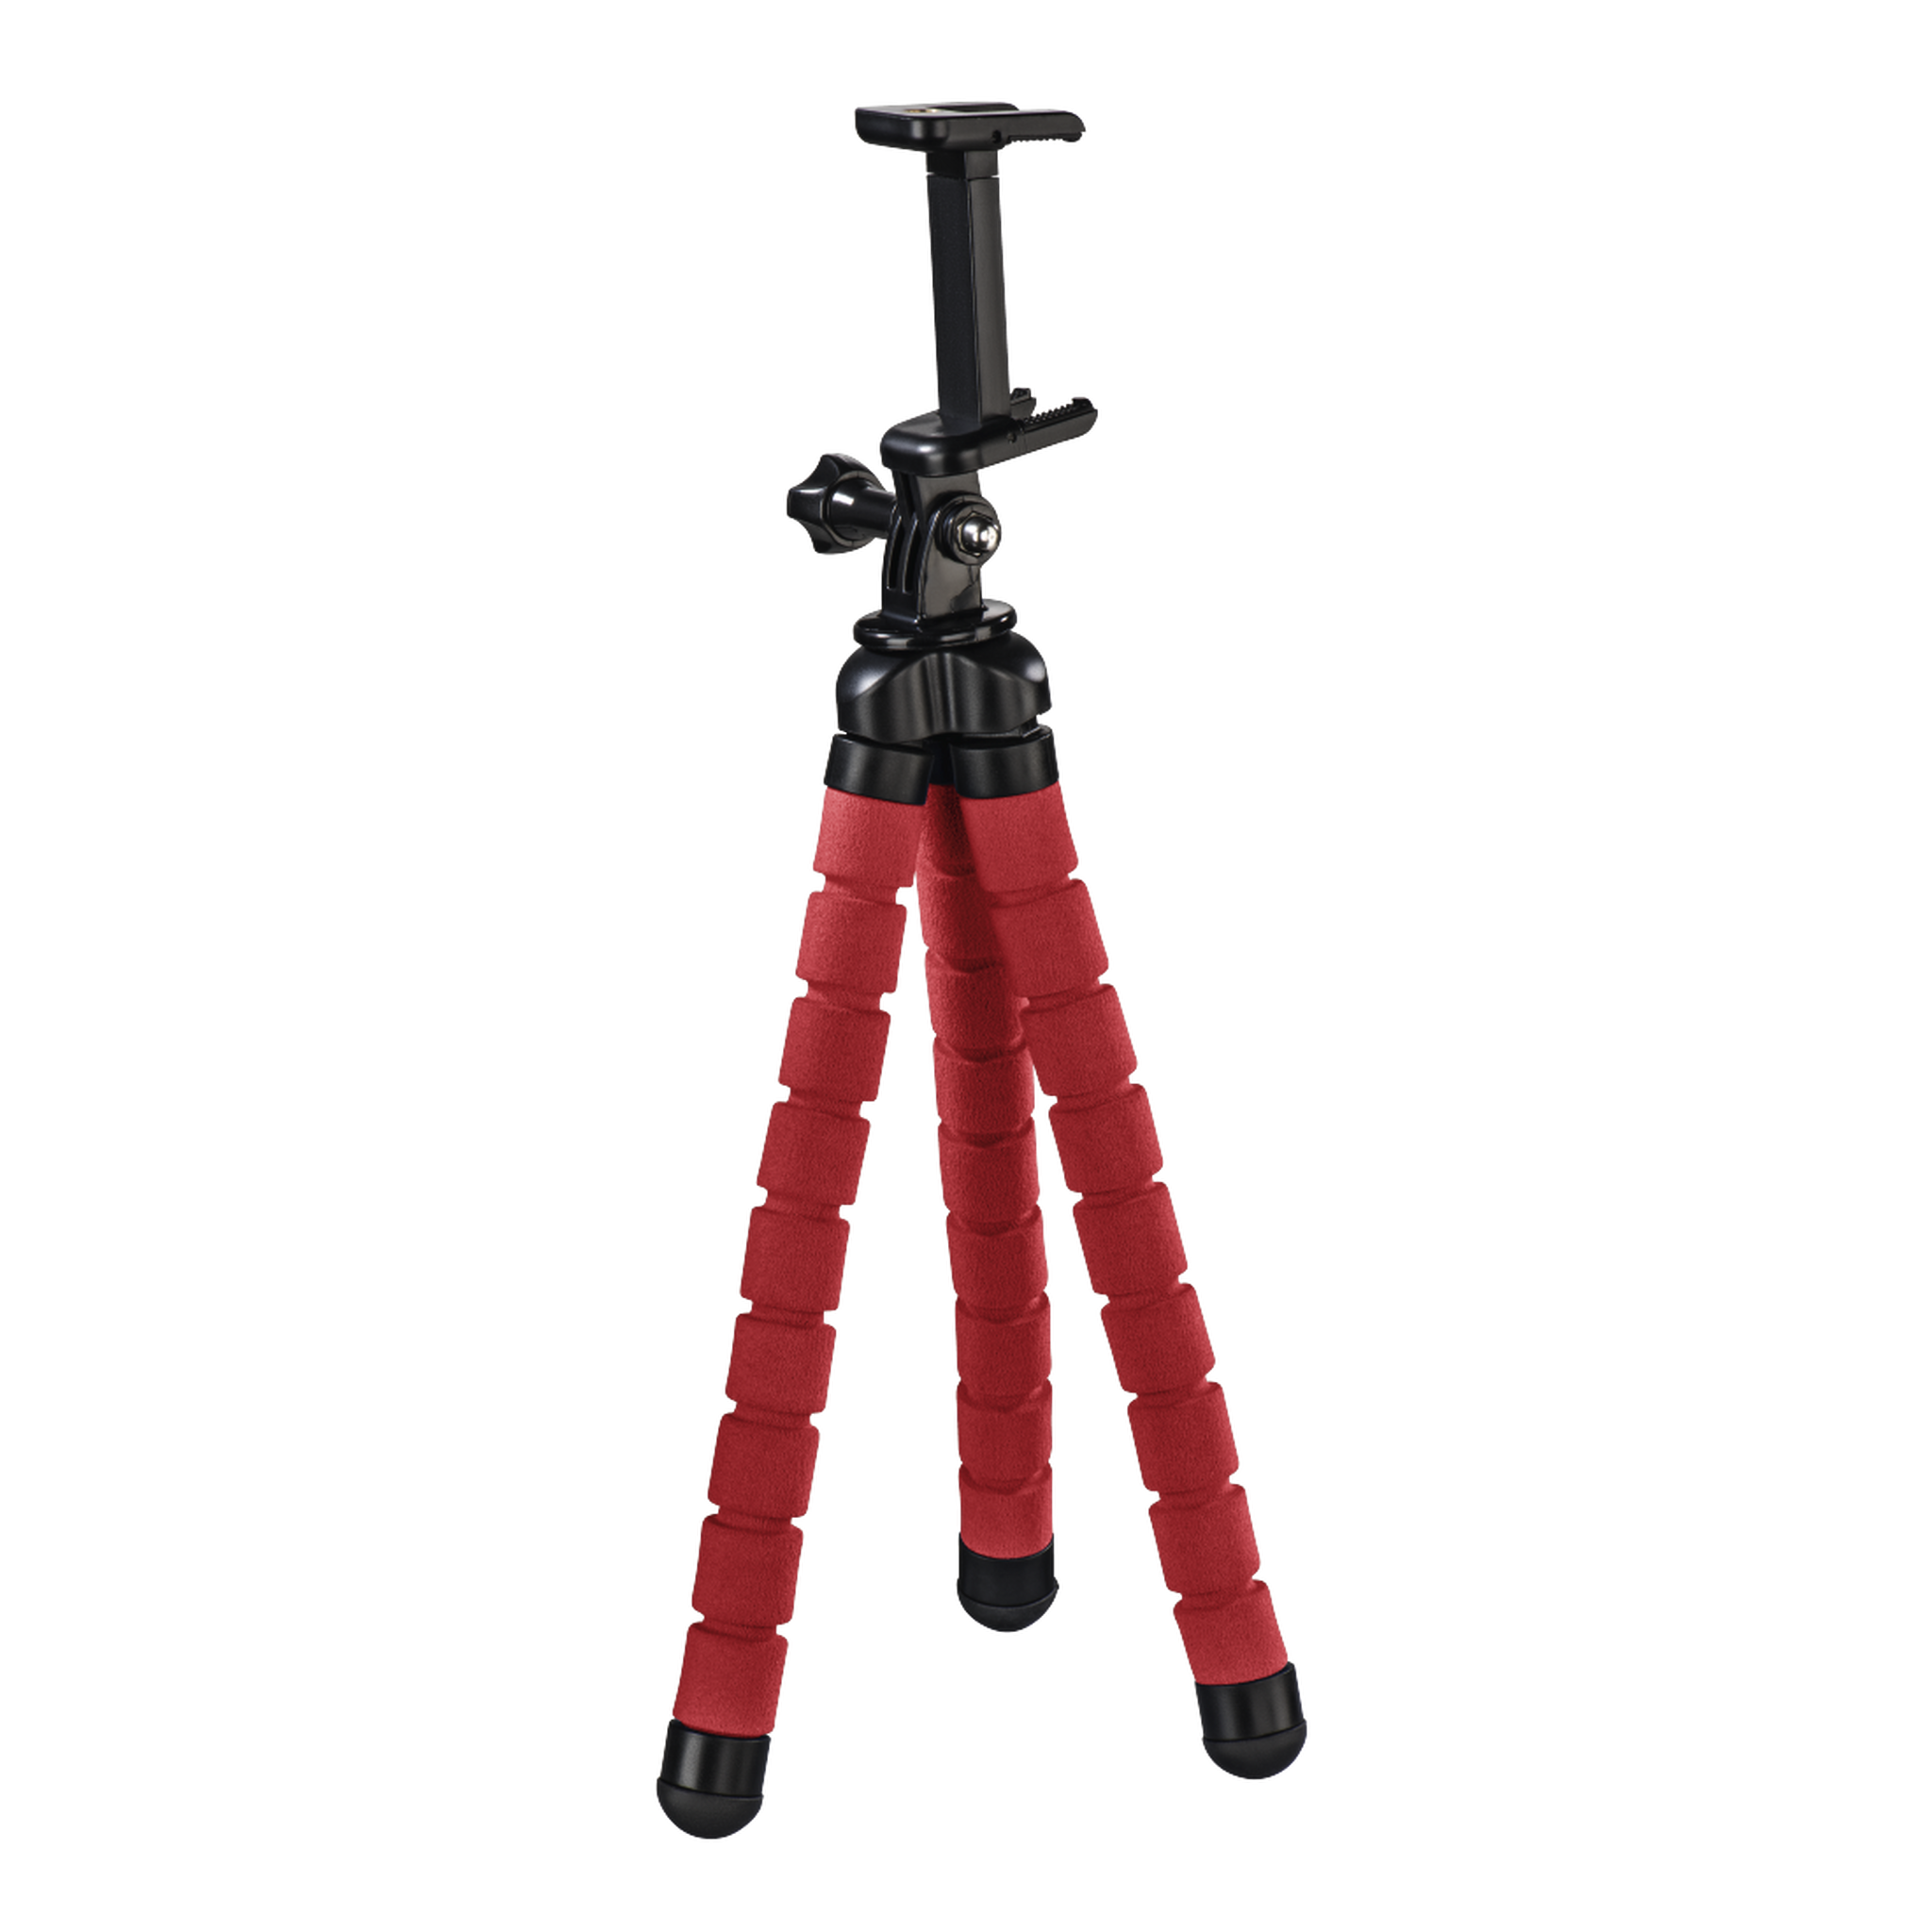 Hama Flex Tripod for Smartphone and GoPro - Red